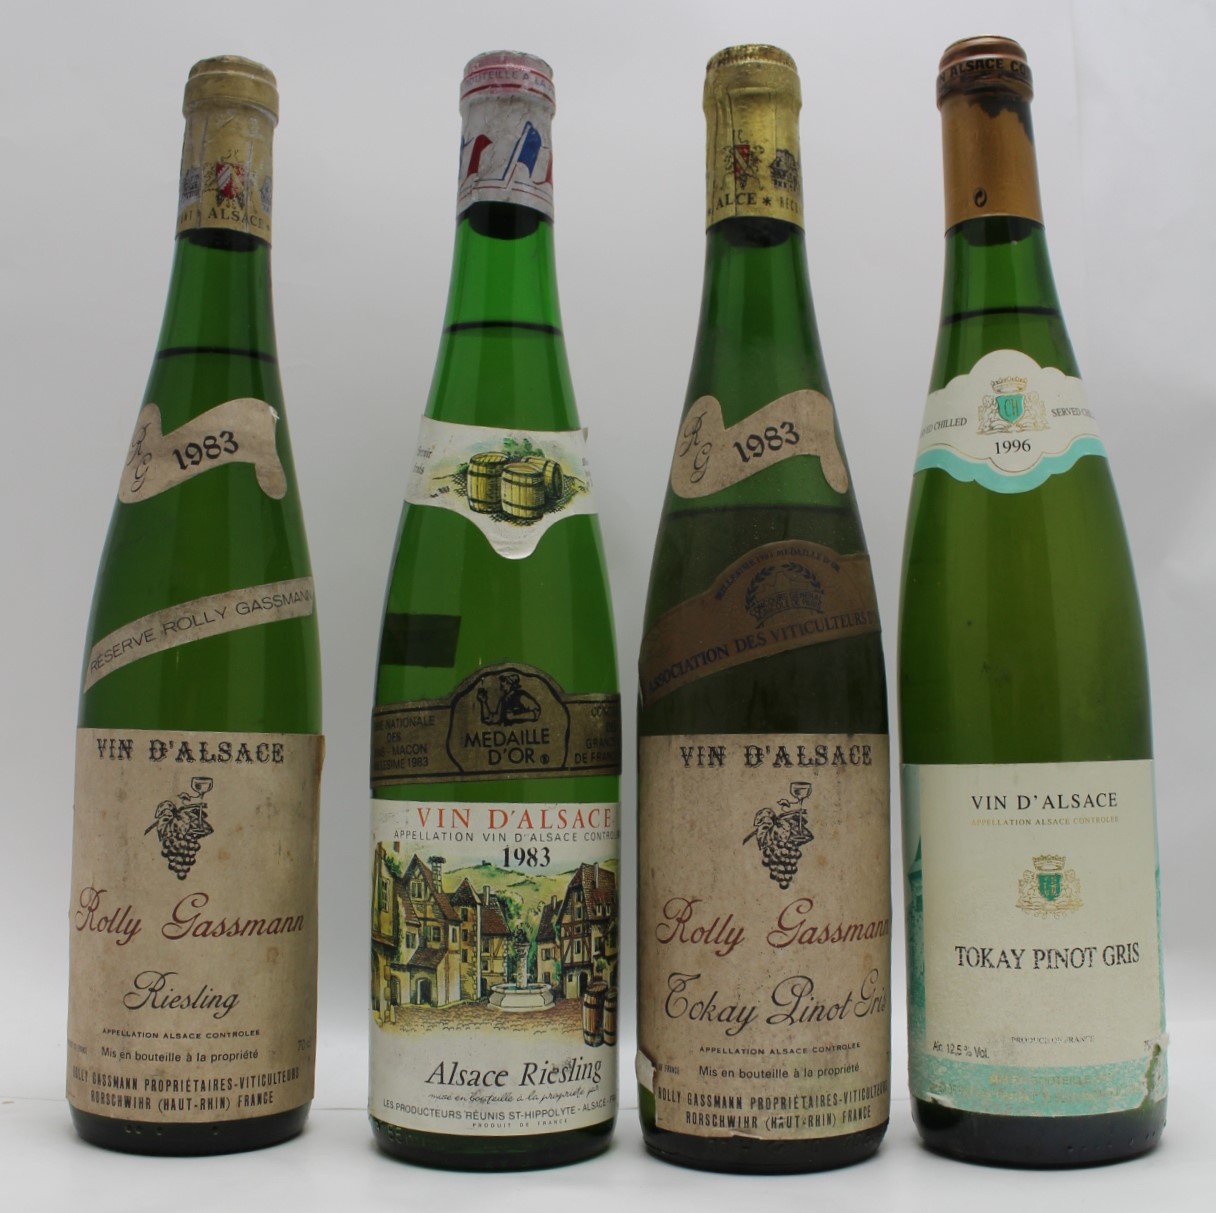 ALSACE TOKAY 1996 Pinot Gris 1 bottle ALSACE RIESLING 1983 Rolly Gassmann, 1 bottle ALSACE TOKAY